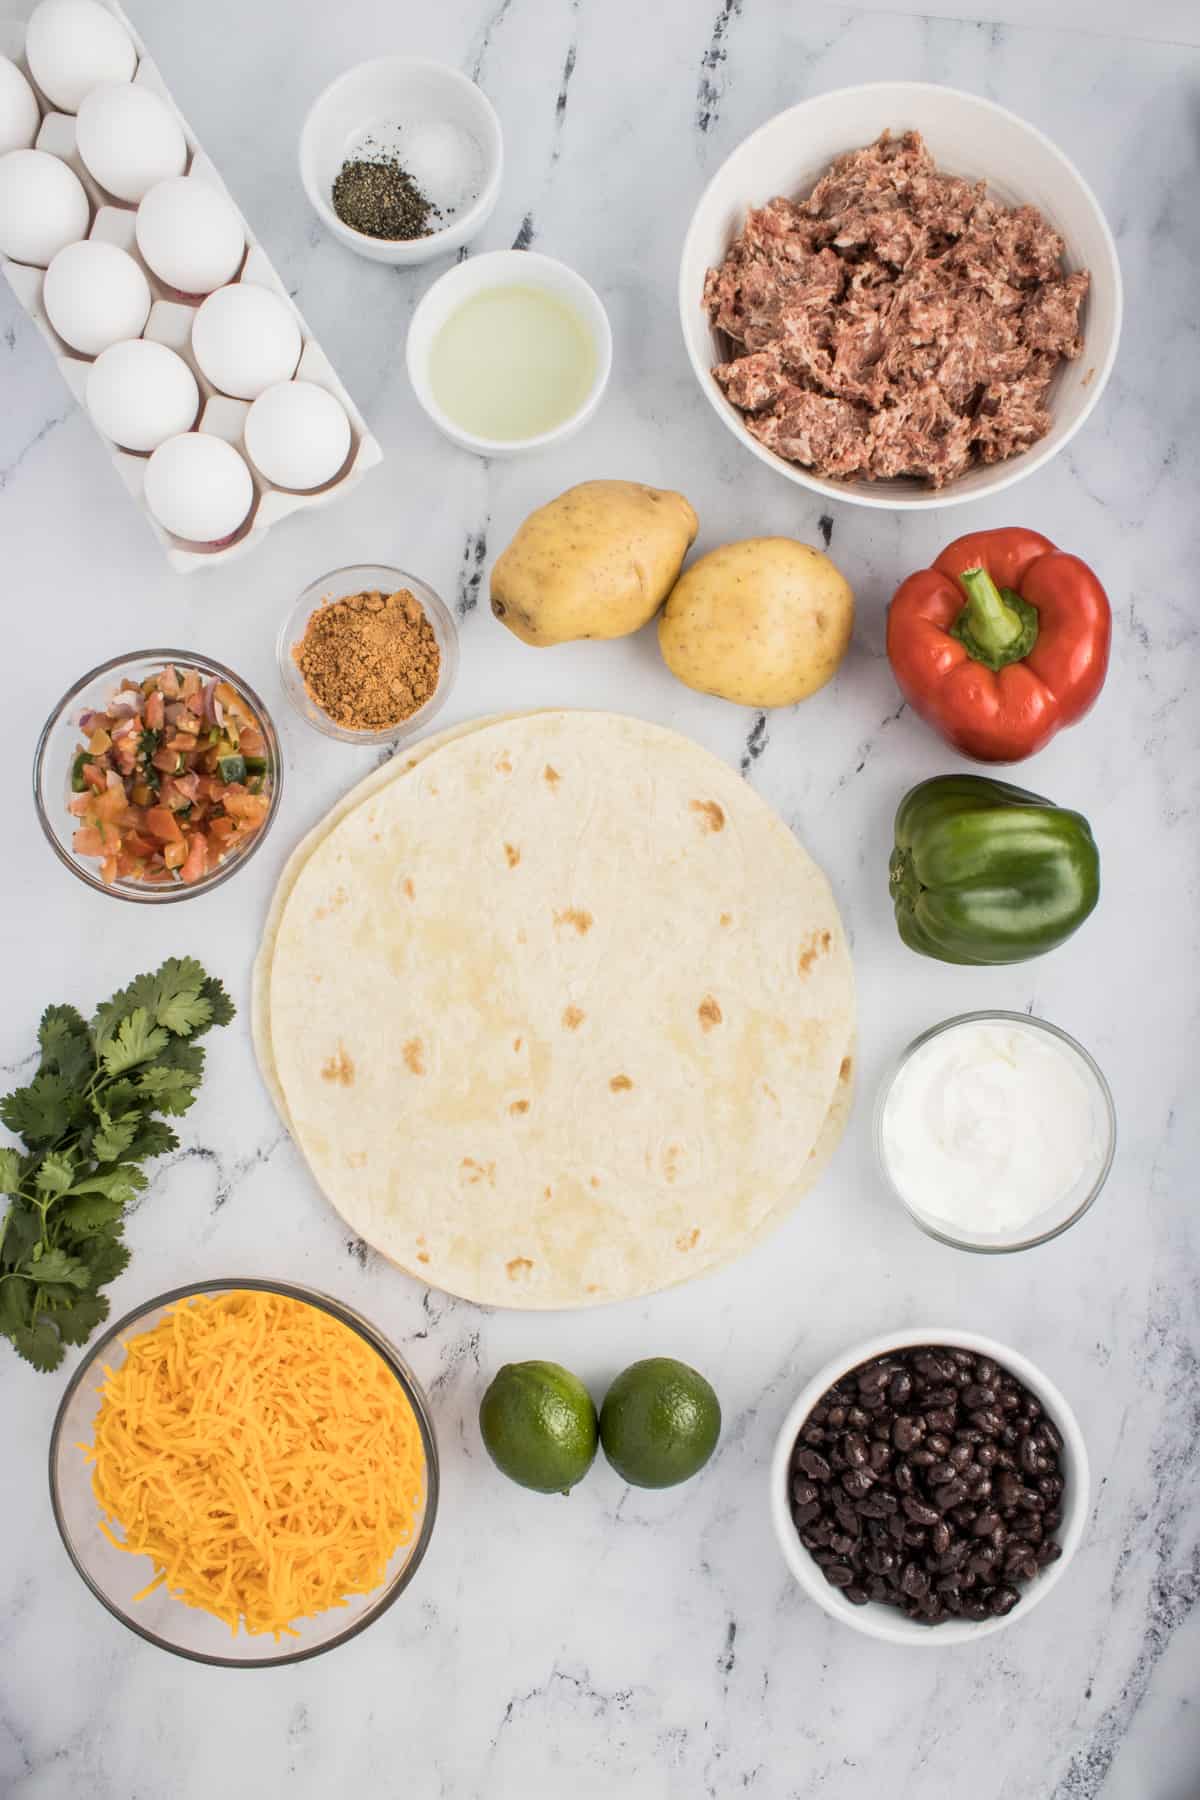 This image is an ingredient shot specifically for the air fryer burrito recipe.